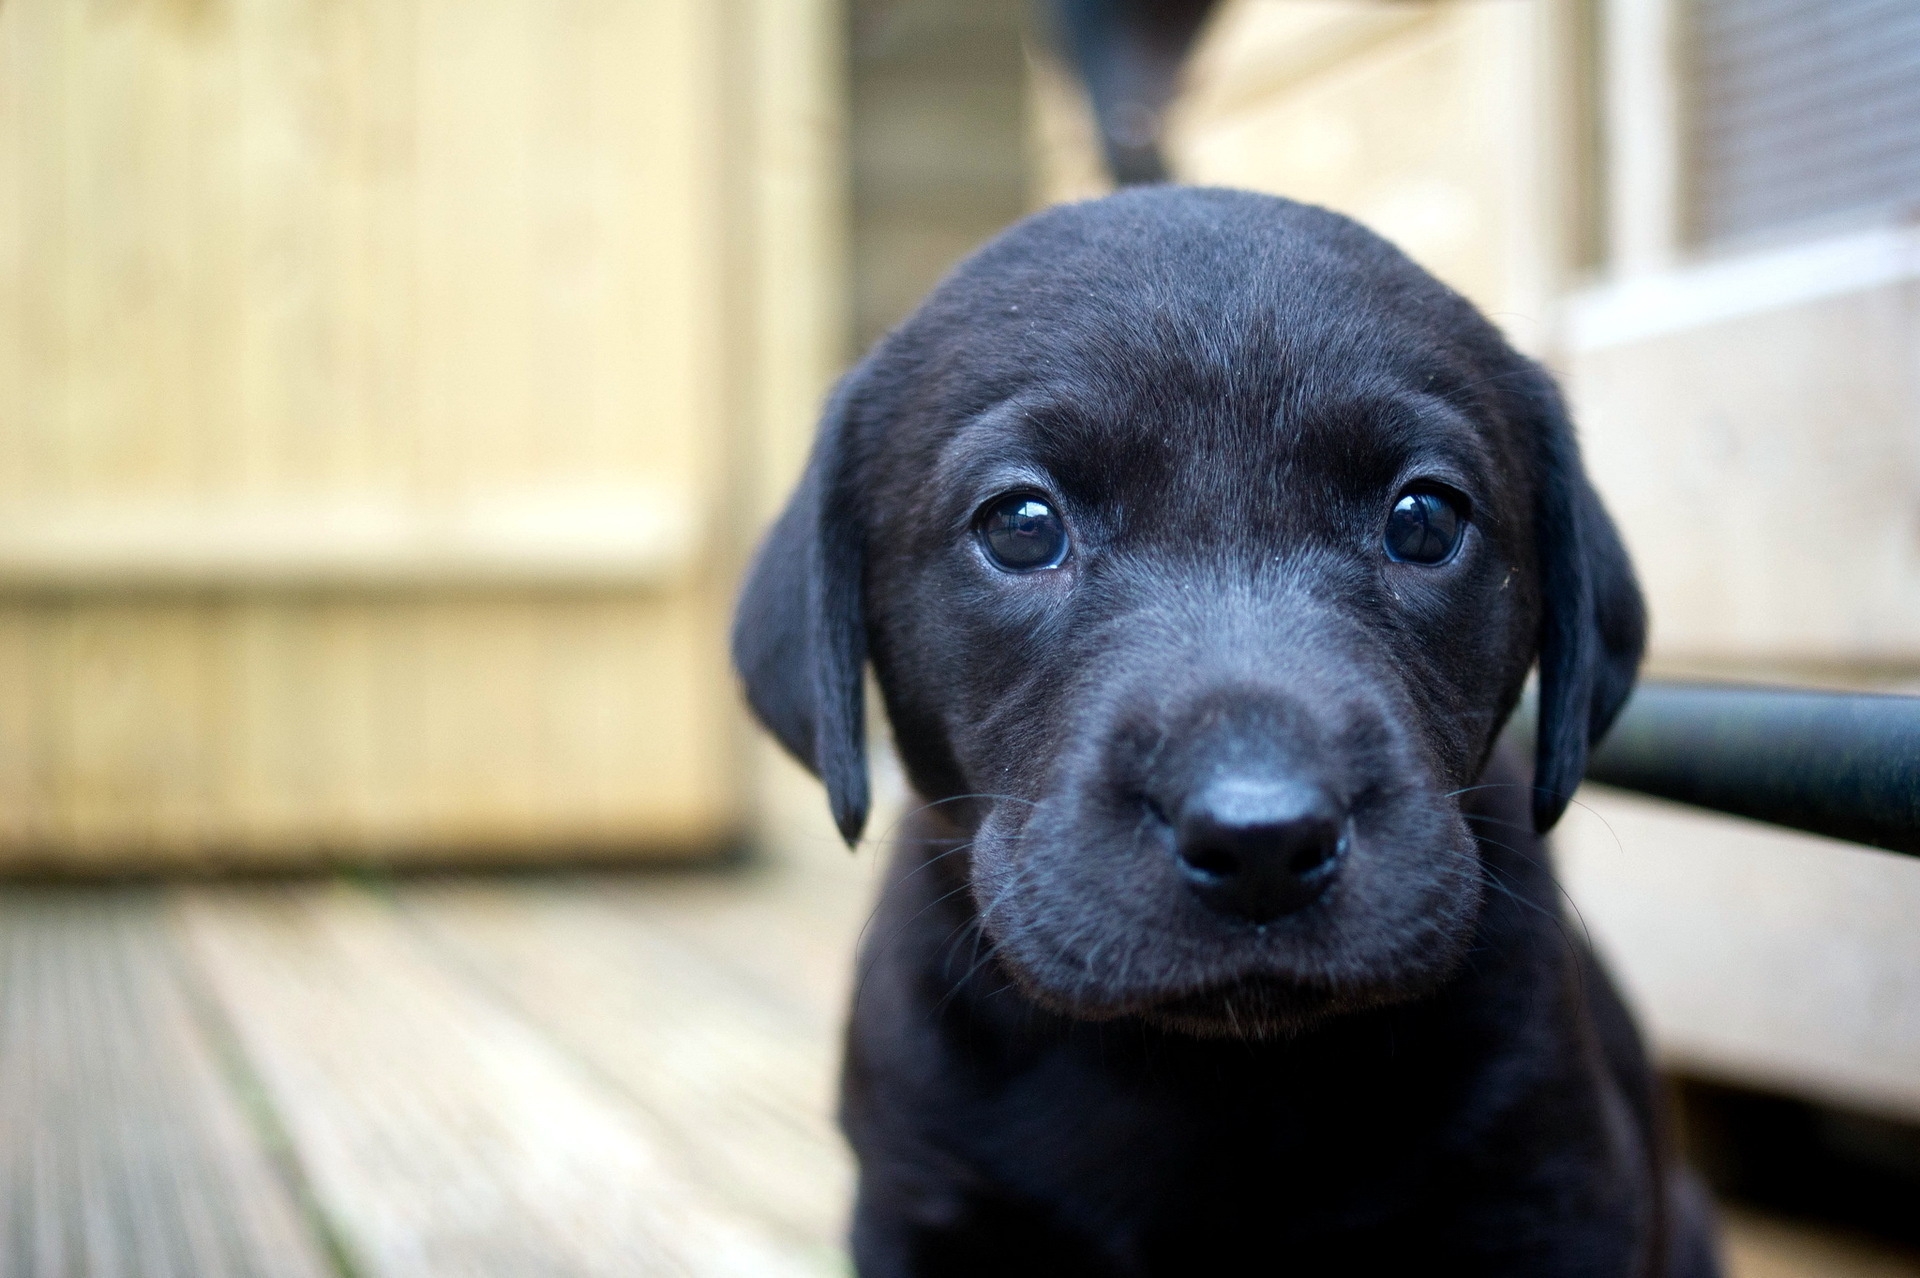 60890 download wallpaper puppy, animals, dog, muzzle, sight, opinion, labrador screensavers and pictures for free